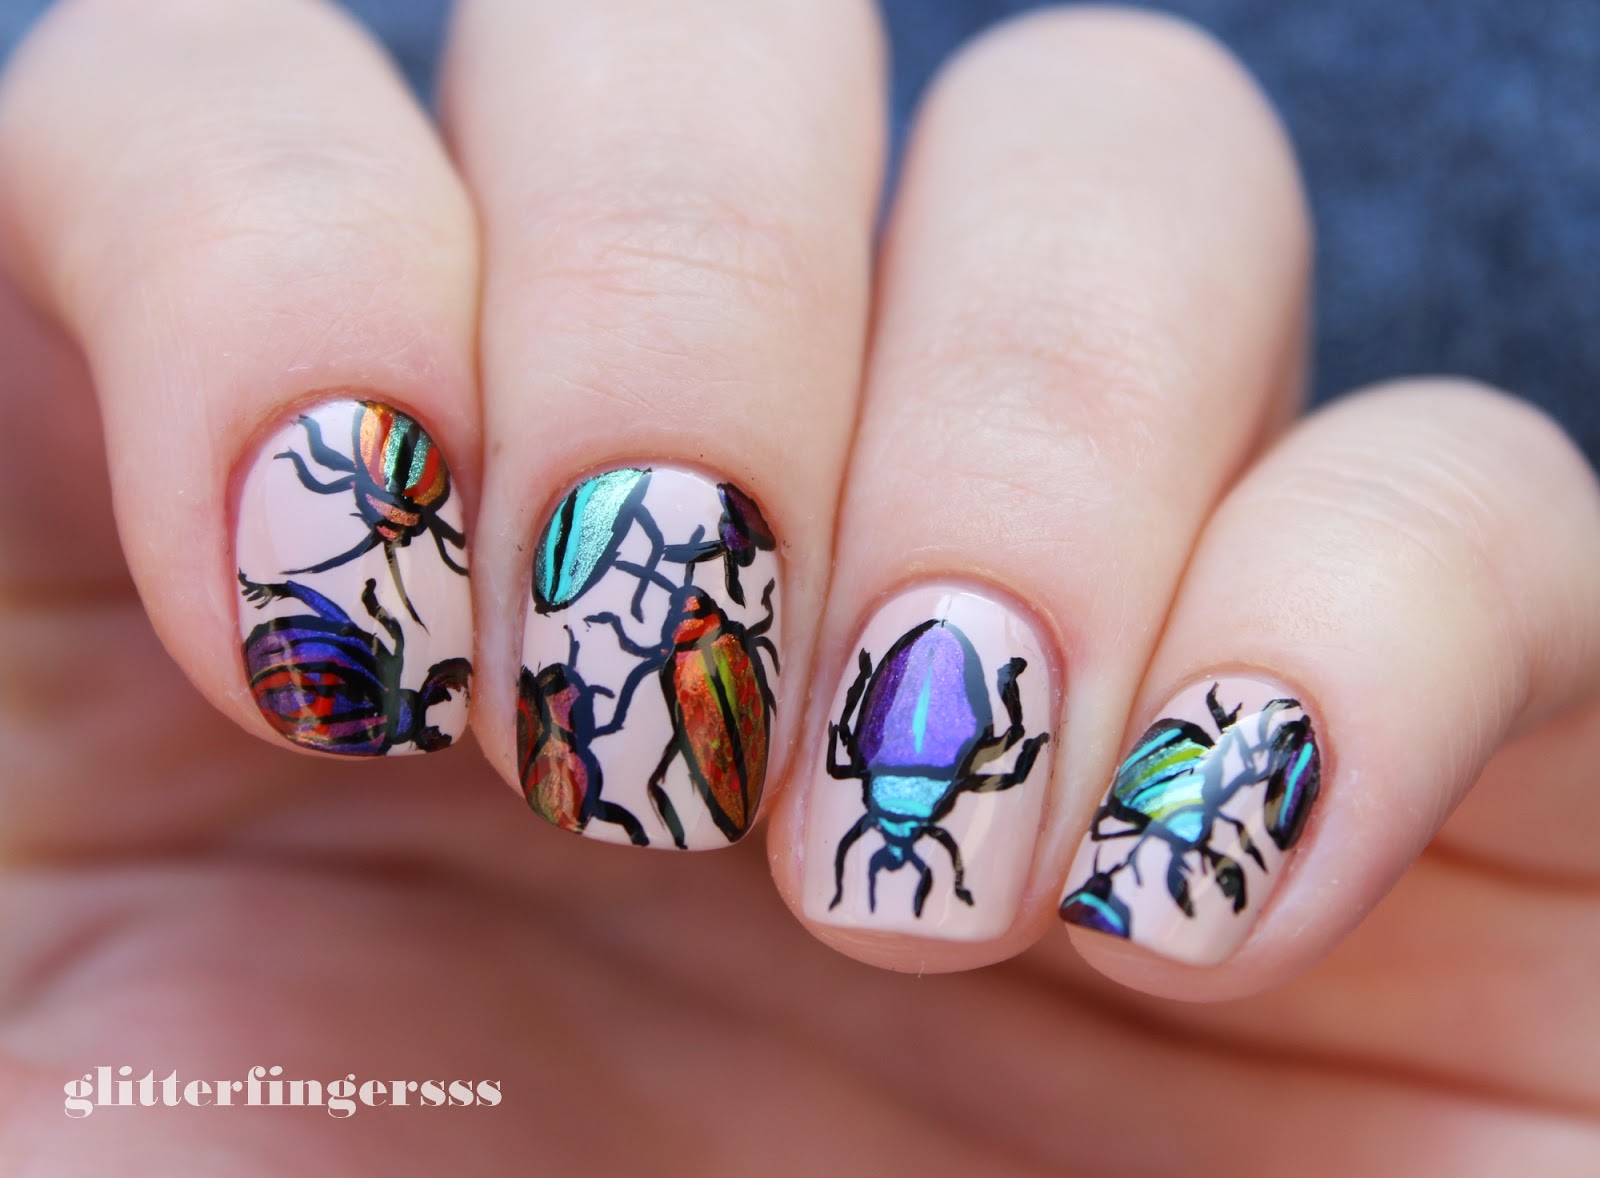 6. Ant Nail Art - wide 1